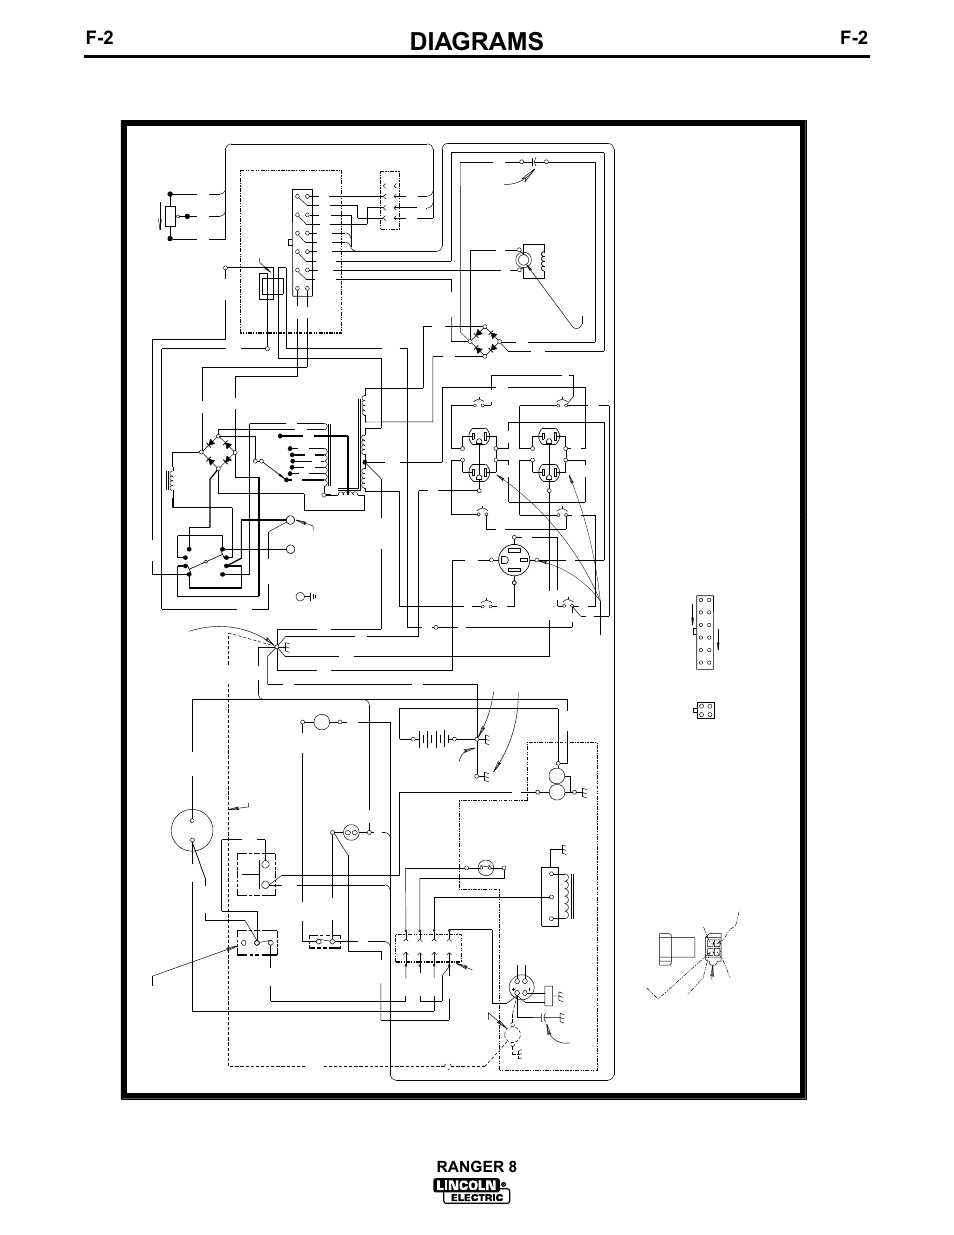 Wiring Diagram For Lincoln 225 Welder from www.manualsdir.com